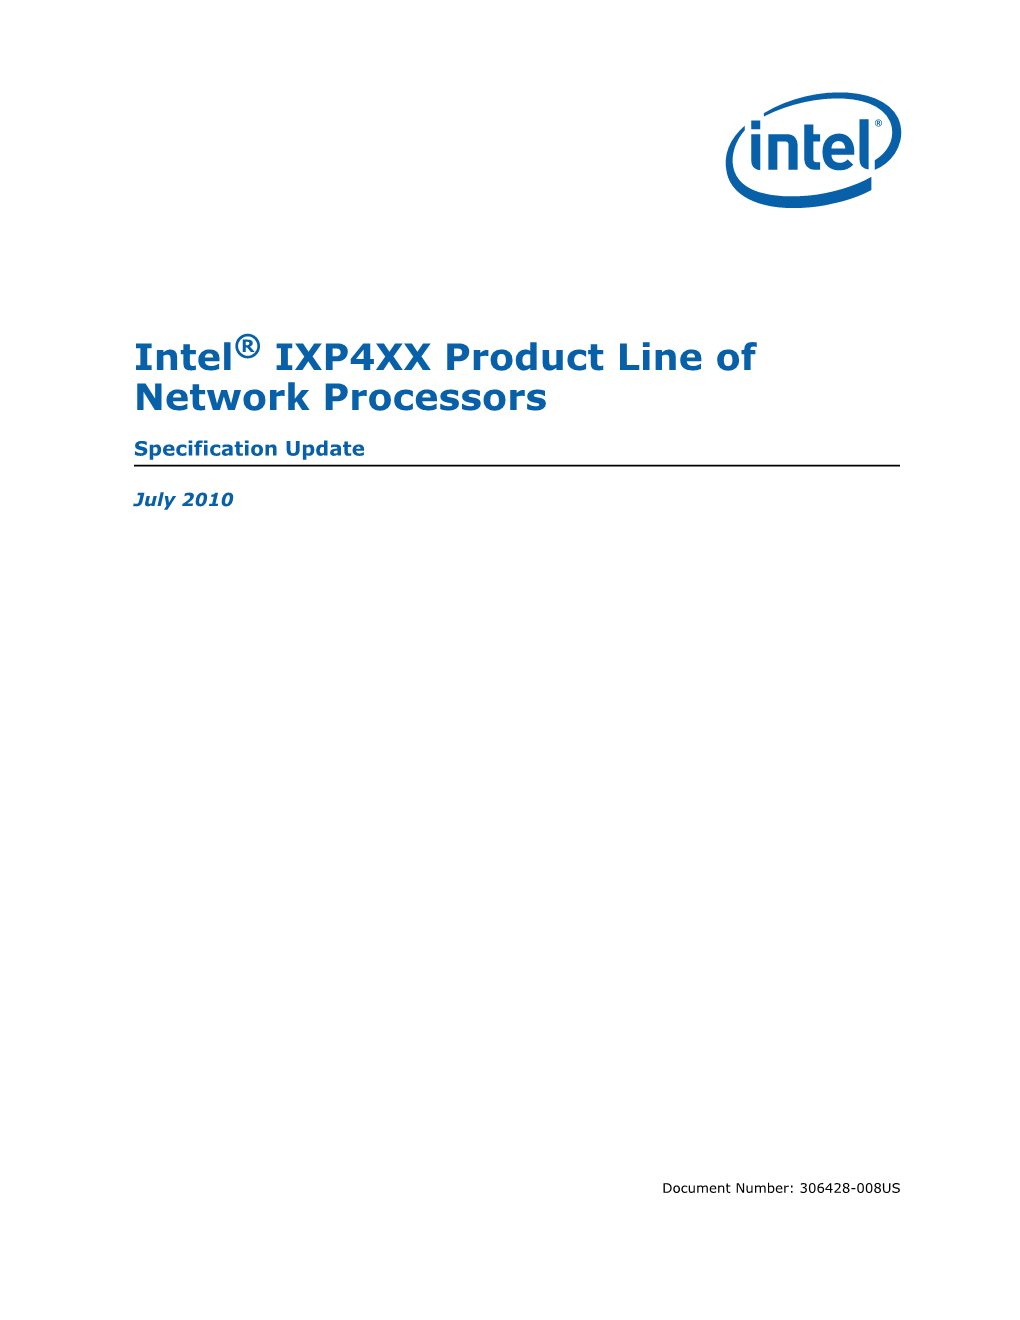 IXP4XX Product Line of Network Processors Specification Update